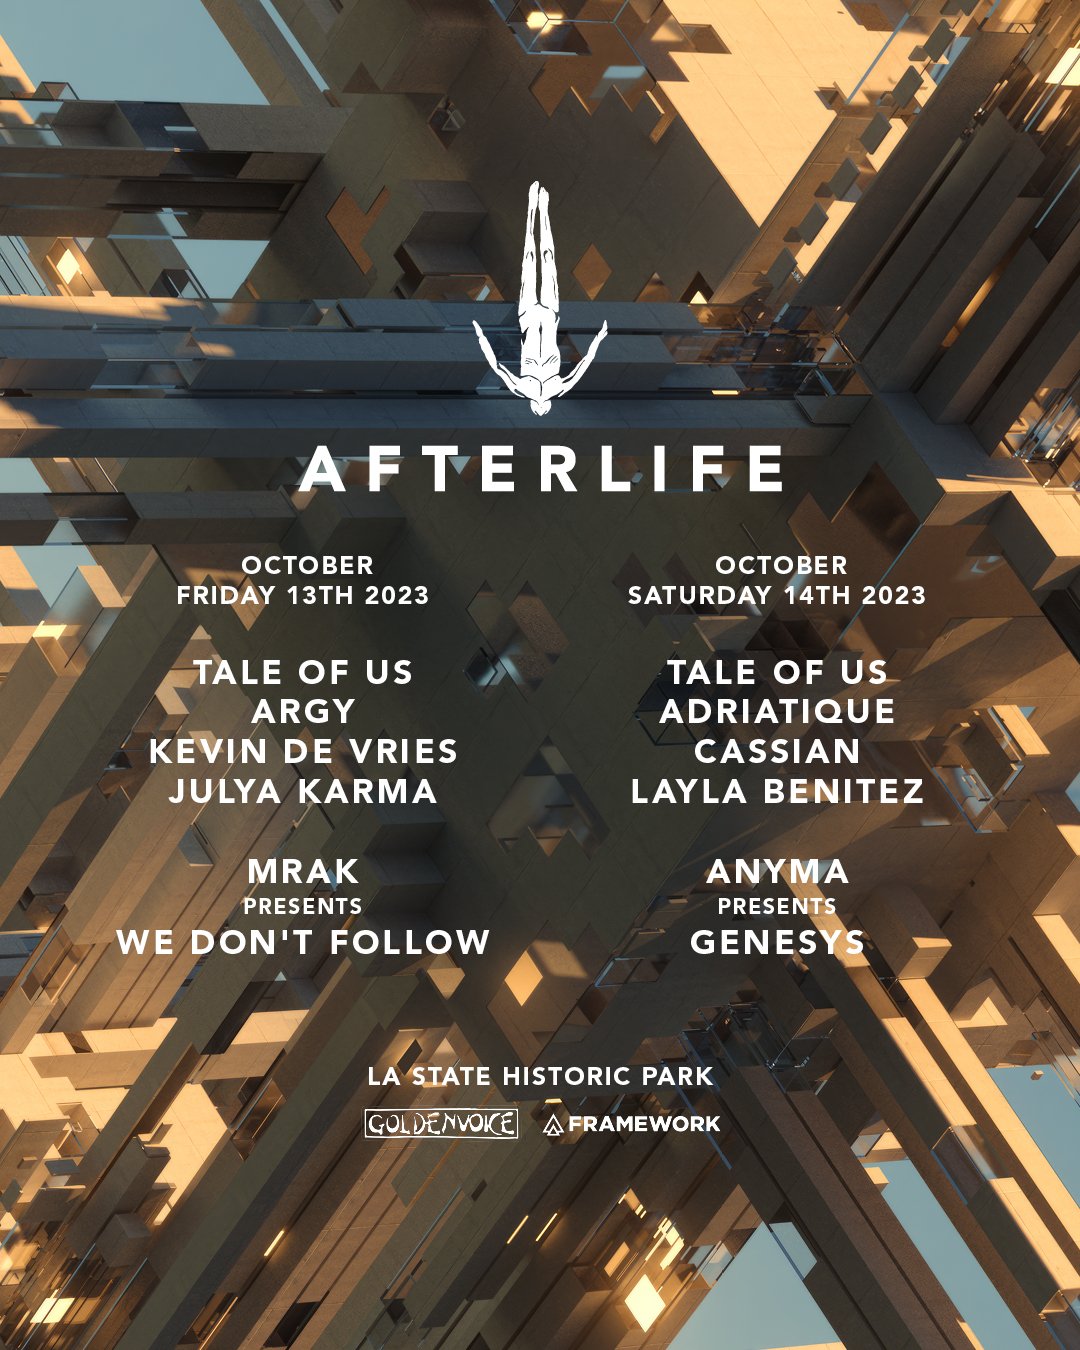 Afterlife - Afterlife added a new photo.